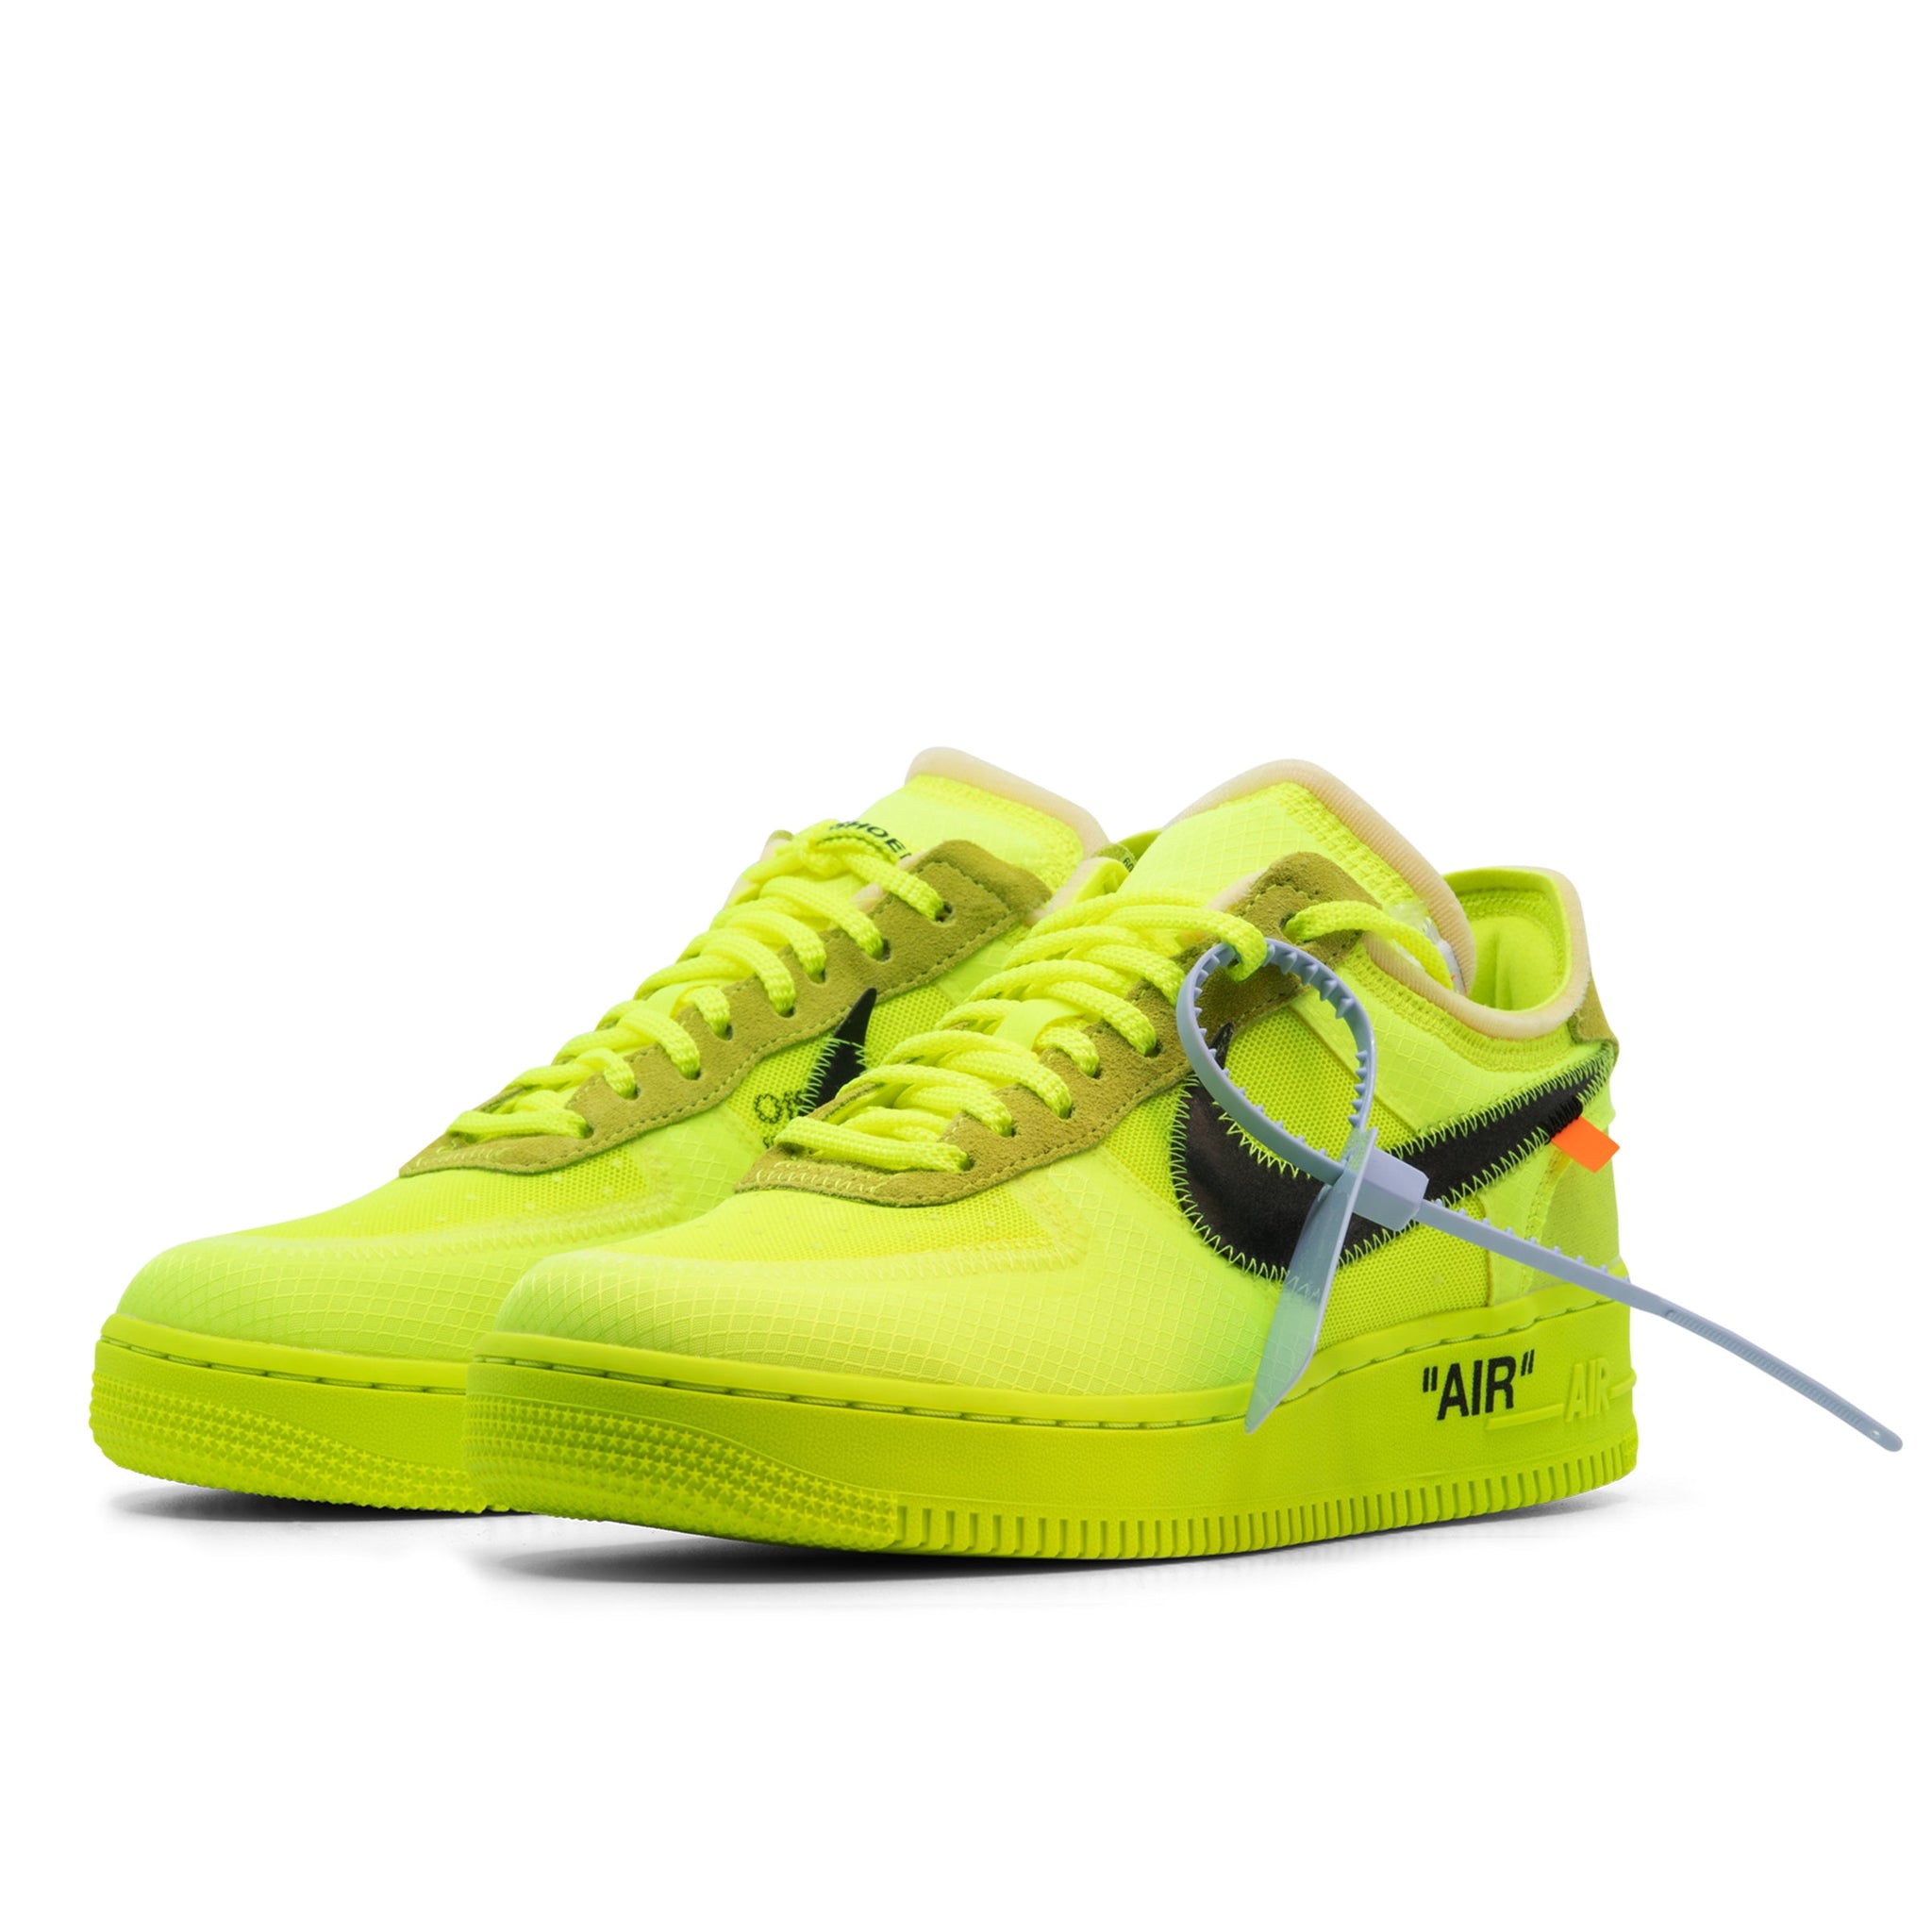 NIKE AIR FORCE 1 LOW OFF-WHITE VOLT